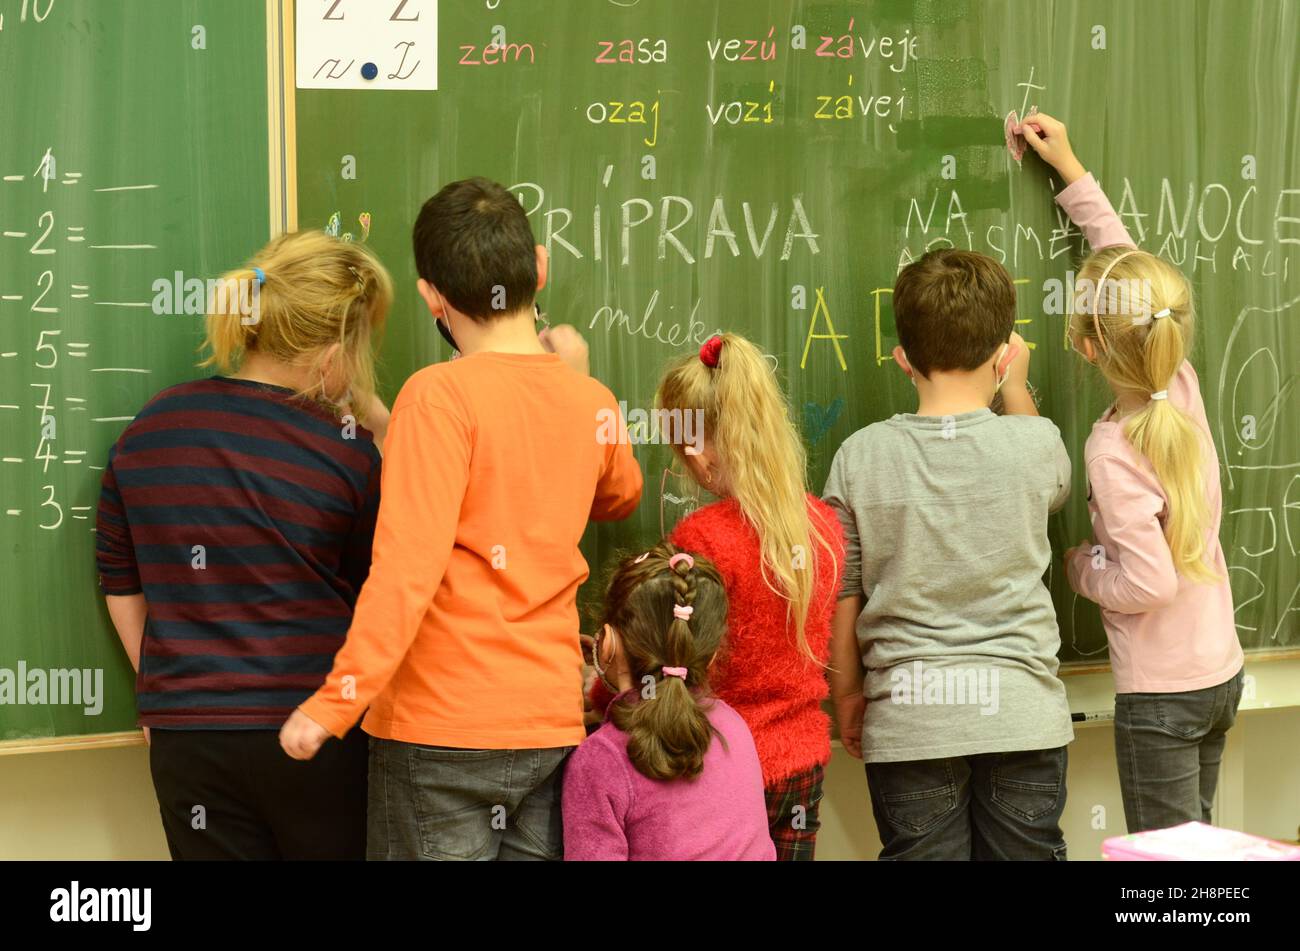 children at school, pupils in the classroom, the hand that writes, relaxed pupils, relaxed atmosphere in the classroom, modern teaching, teamwork Stock Photo